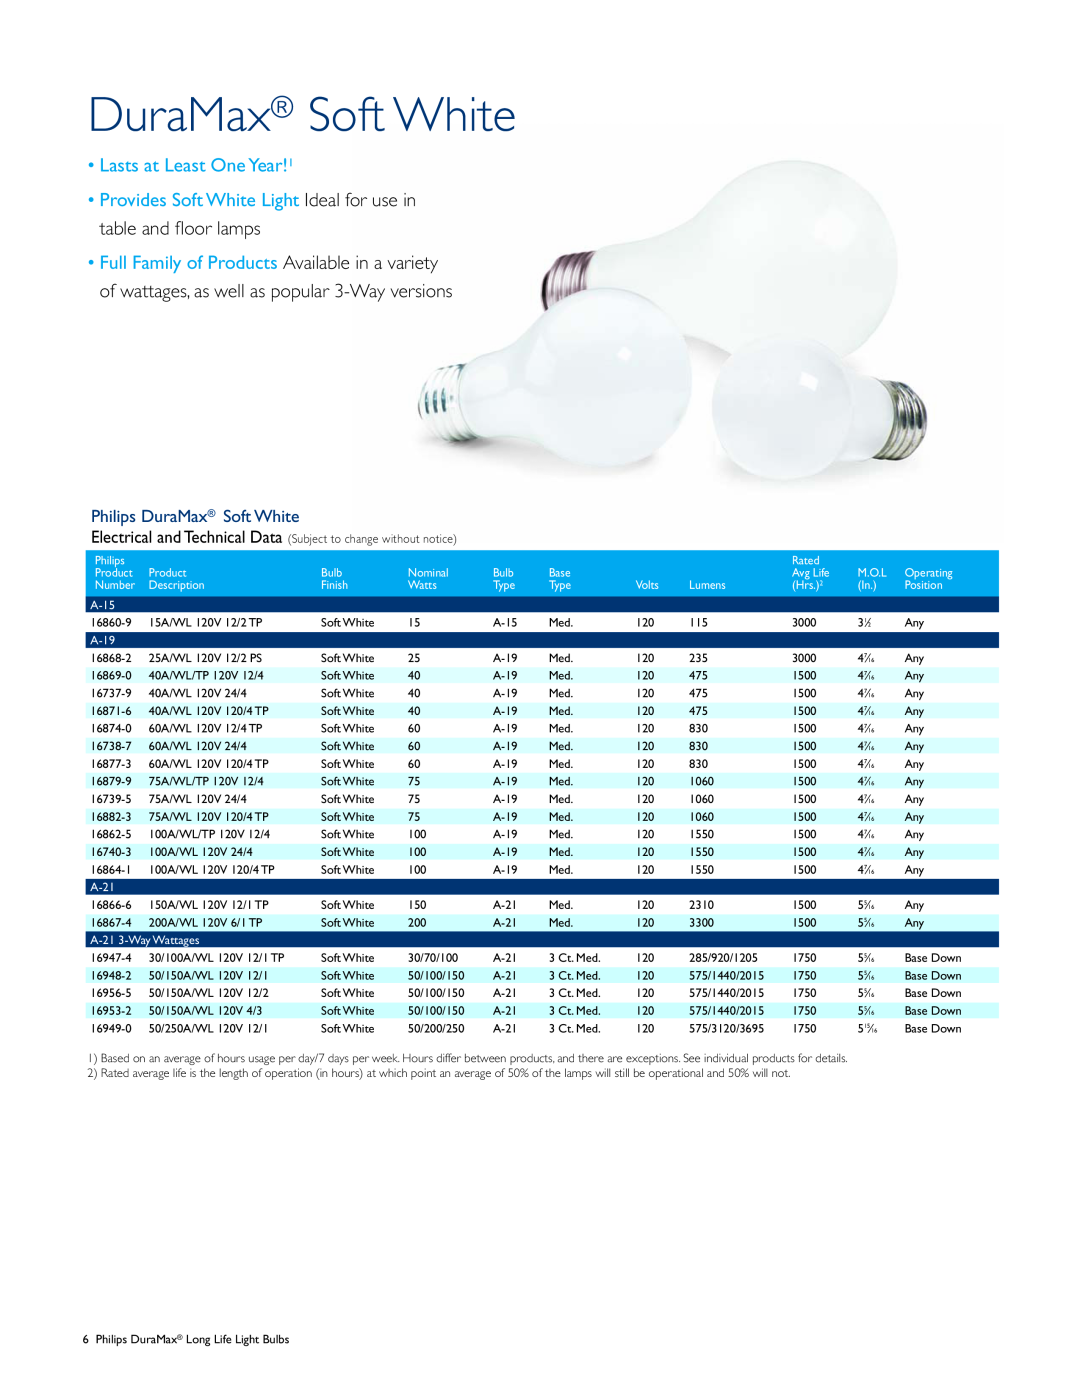 Philips Long Life Light Bulb manual Lasts at Least OneYear!1, Philips DuraMax Soft White 